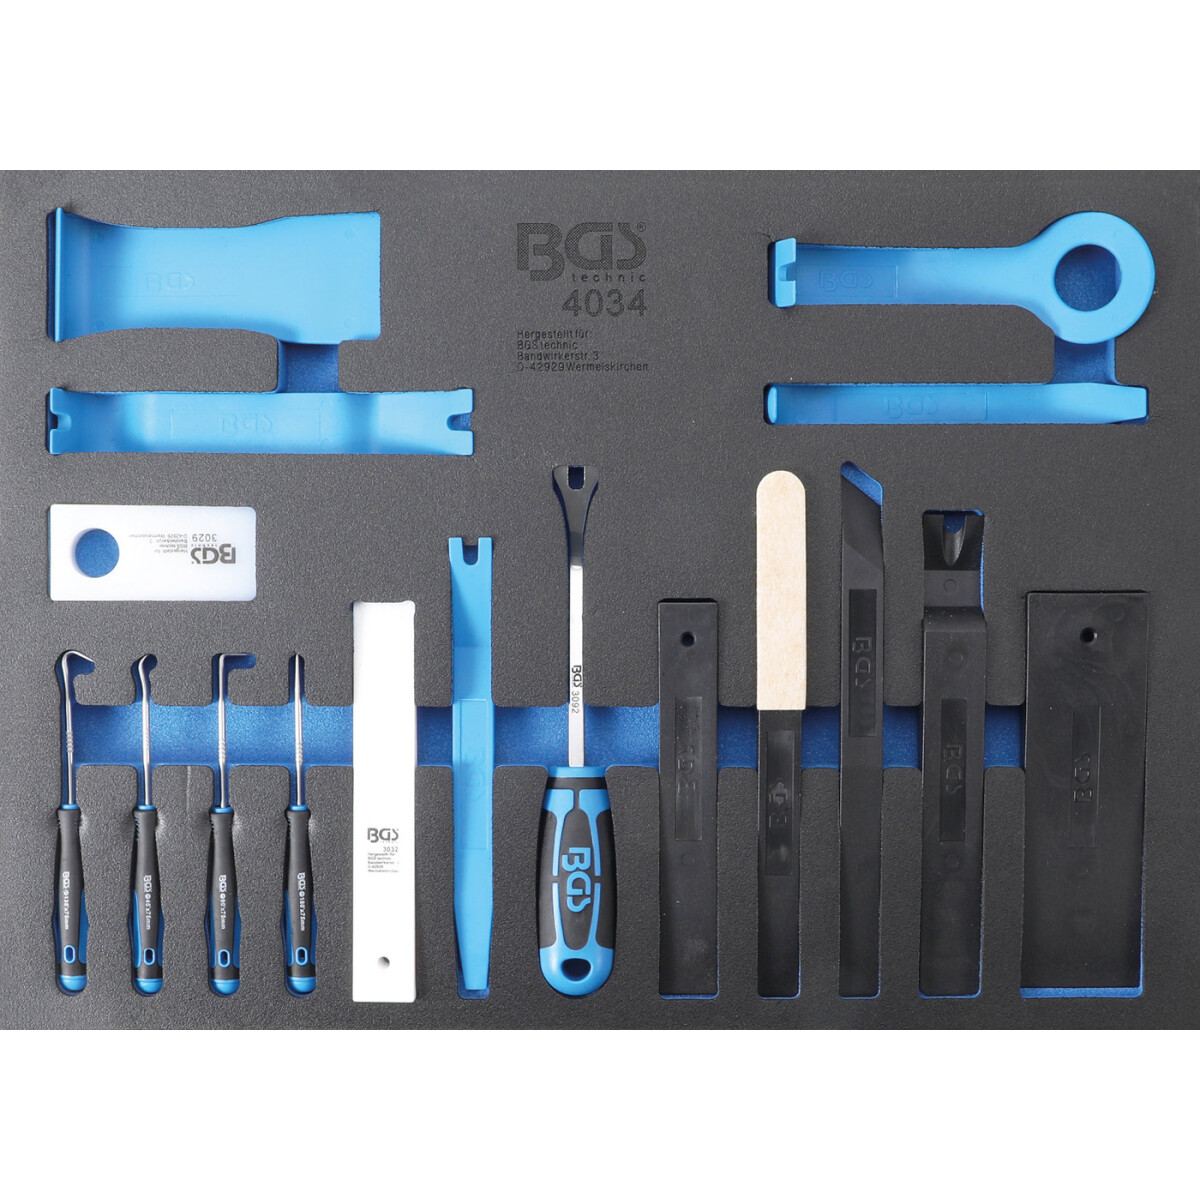 BGS Tool Tray 3/3: Release Tools, Assembly Wedge and Hook Set | 17 pcs. (BGS 4034)